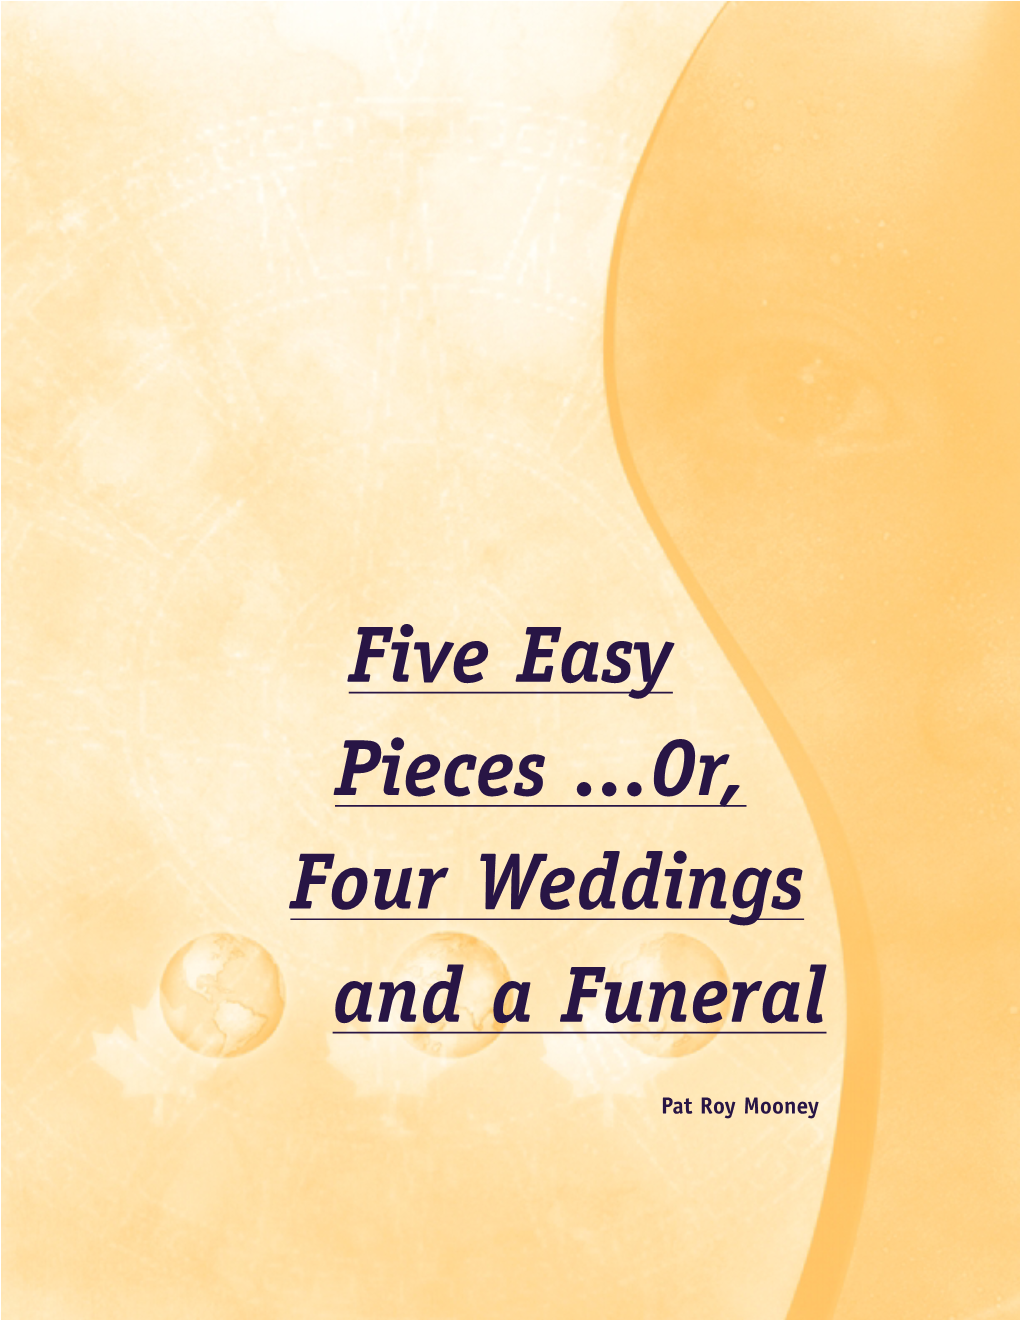 Five Easy Pieces ...Or, Four Weddings and a Funeral